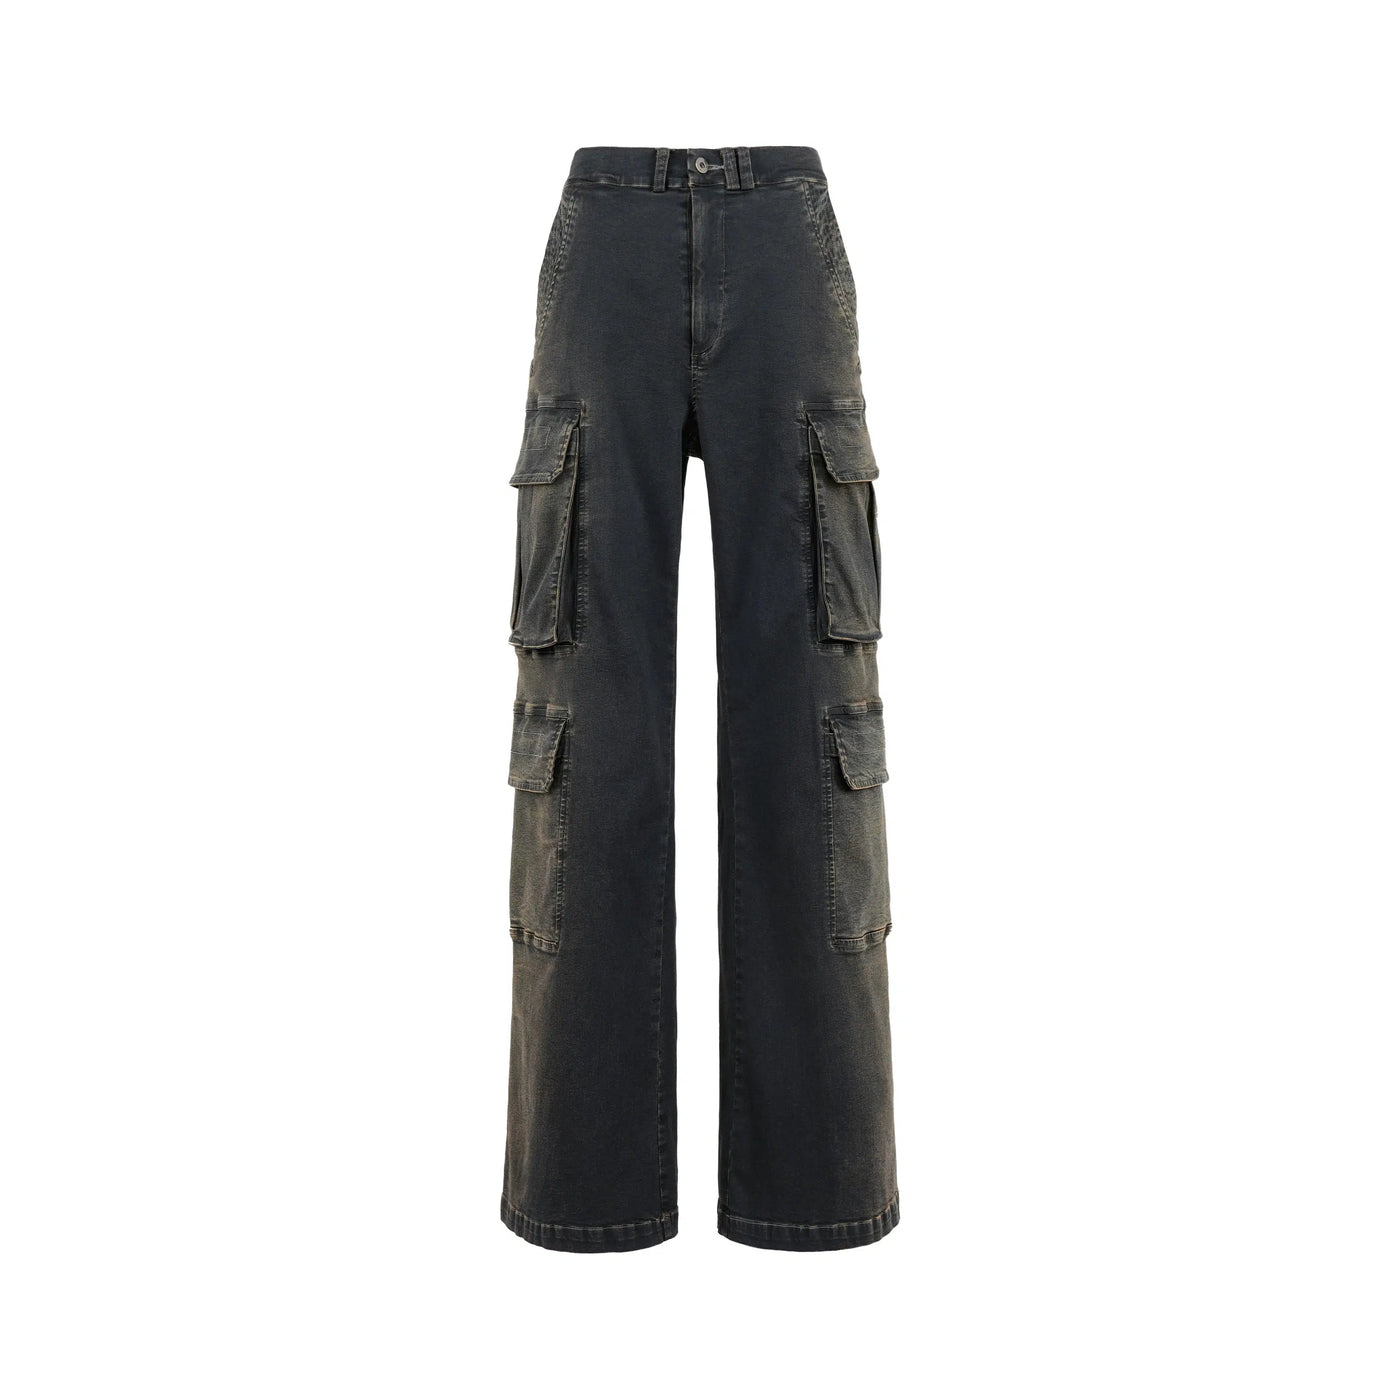 Vintage Washed Cargo Jeans Korean Street Fashion Jeans By Underwater Shop Online at OH Vault